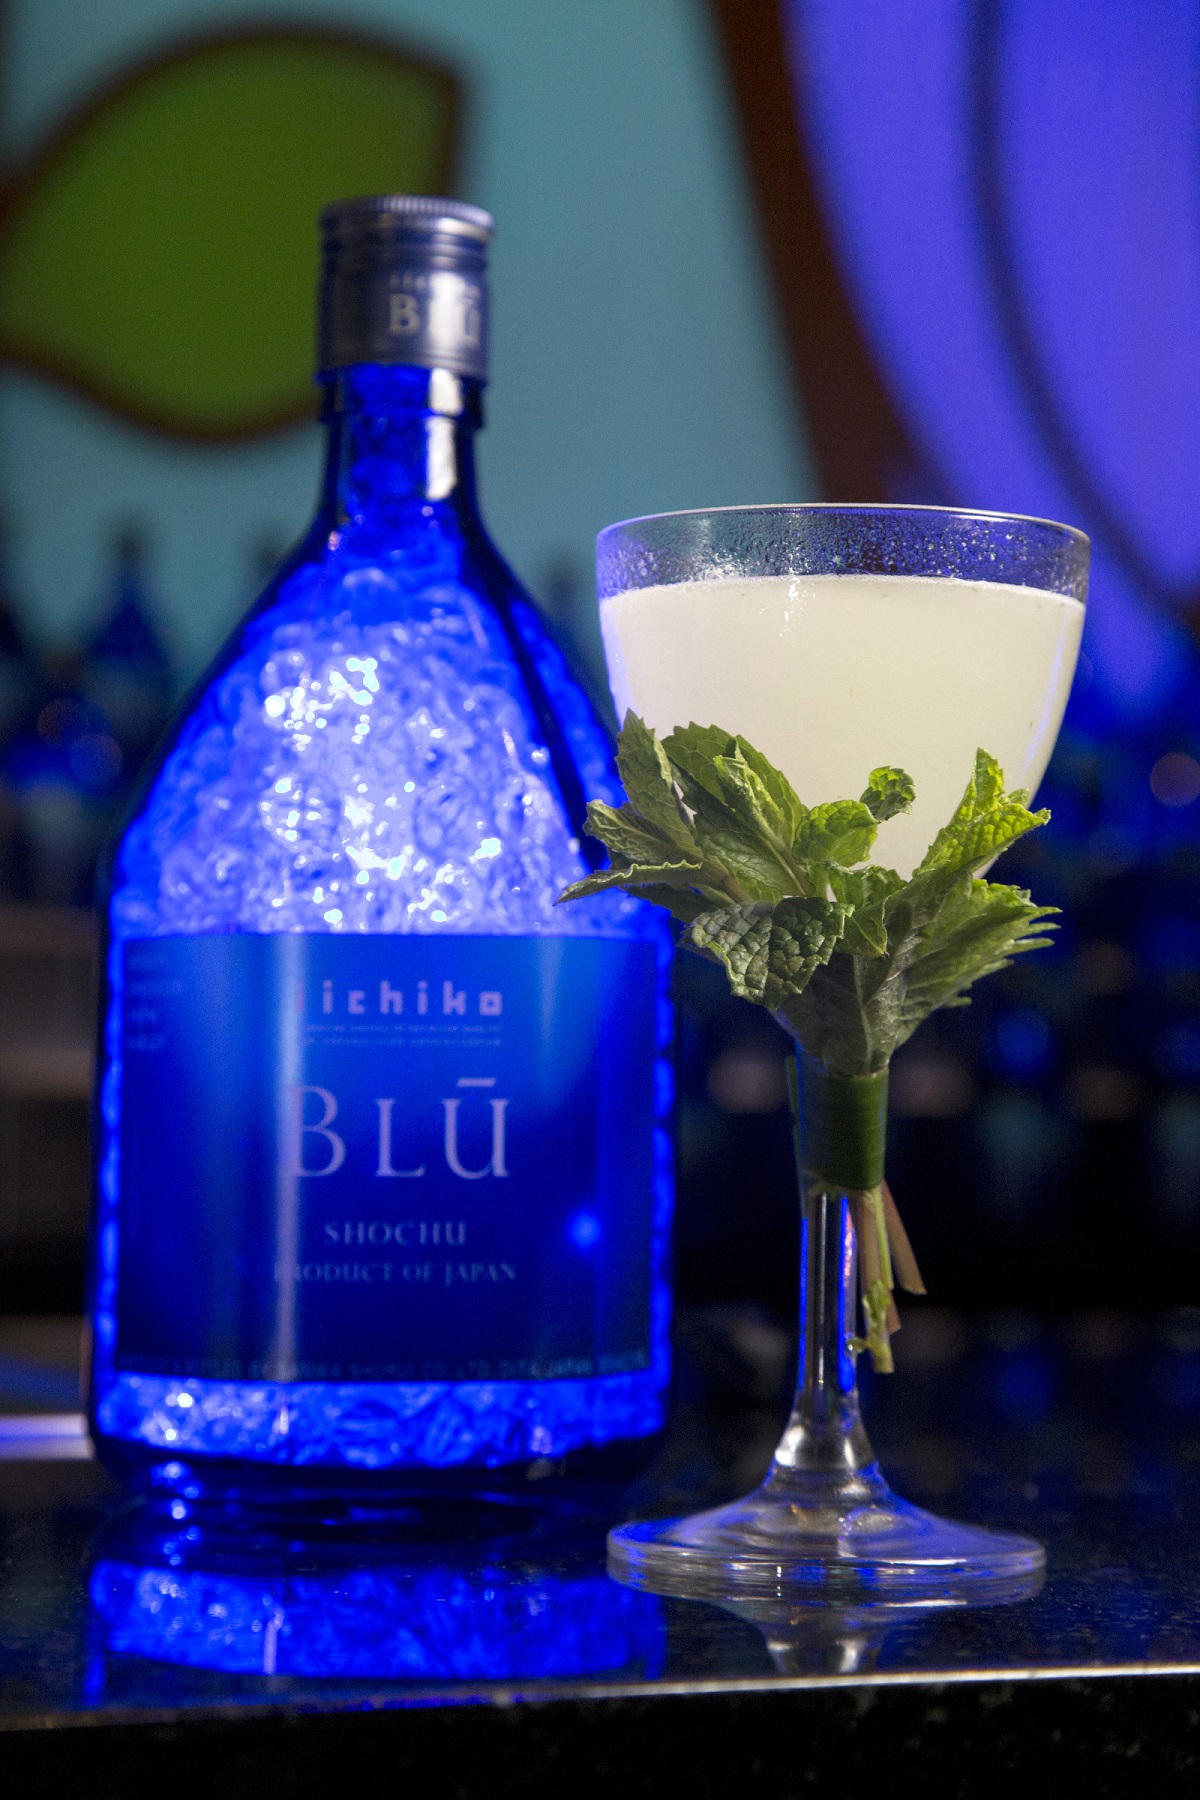 Andrew Woodley’s “Gift of the Islands” was the winning cocktail at the 2018 iichiko BLŪ Bartender Competition.